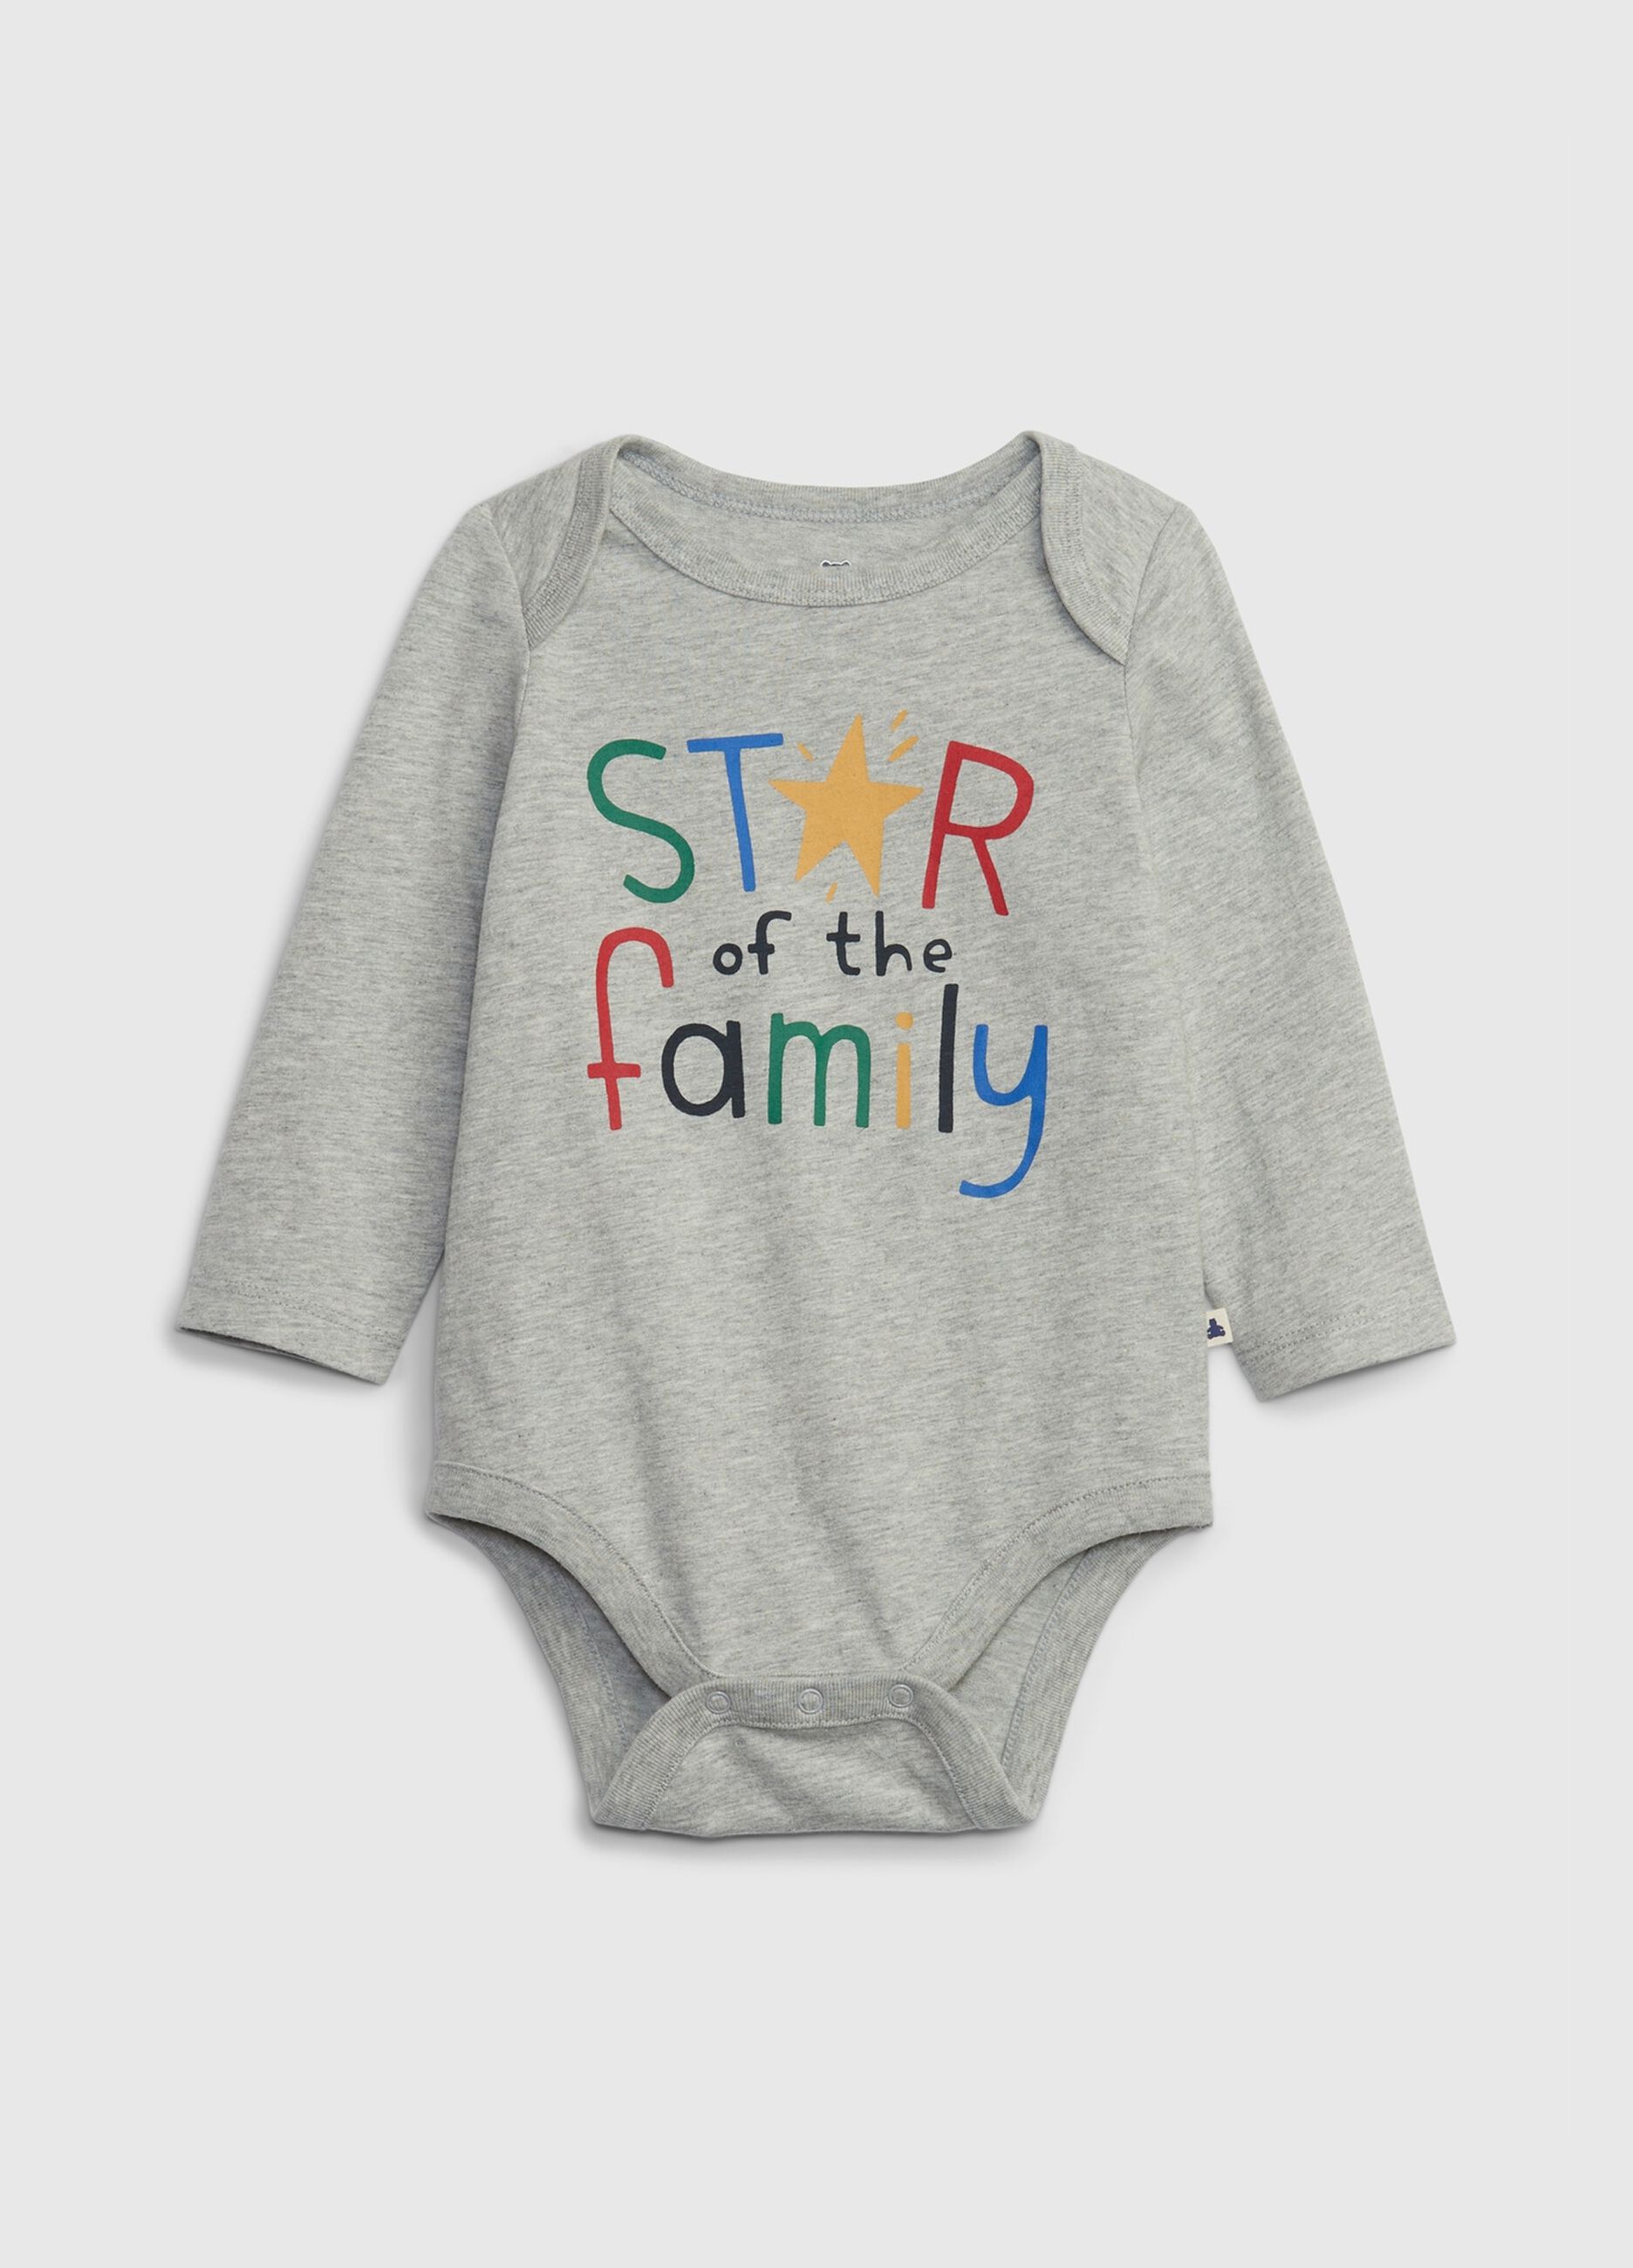 Bodysuit in organic cotton with printed lettering